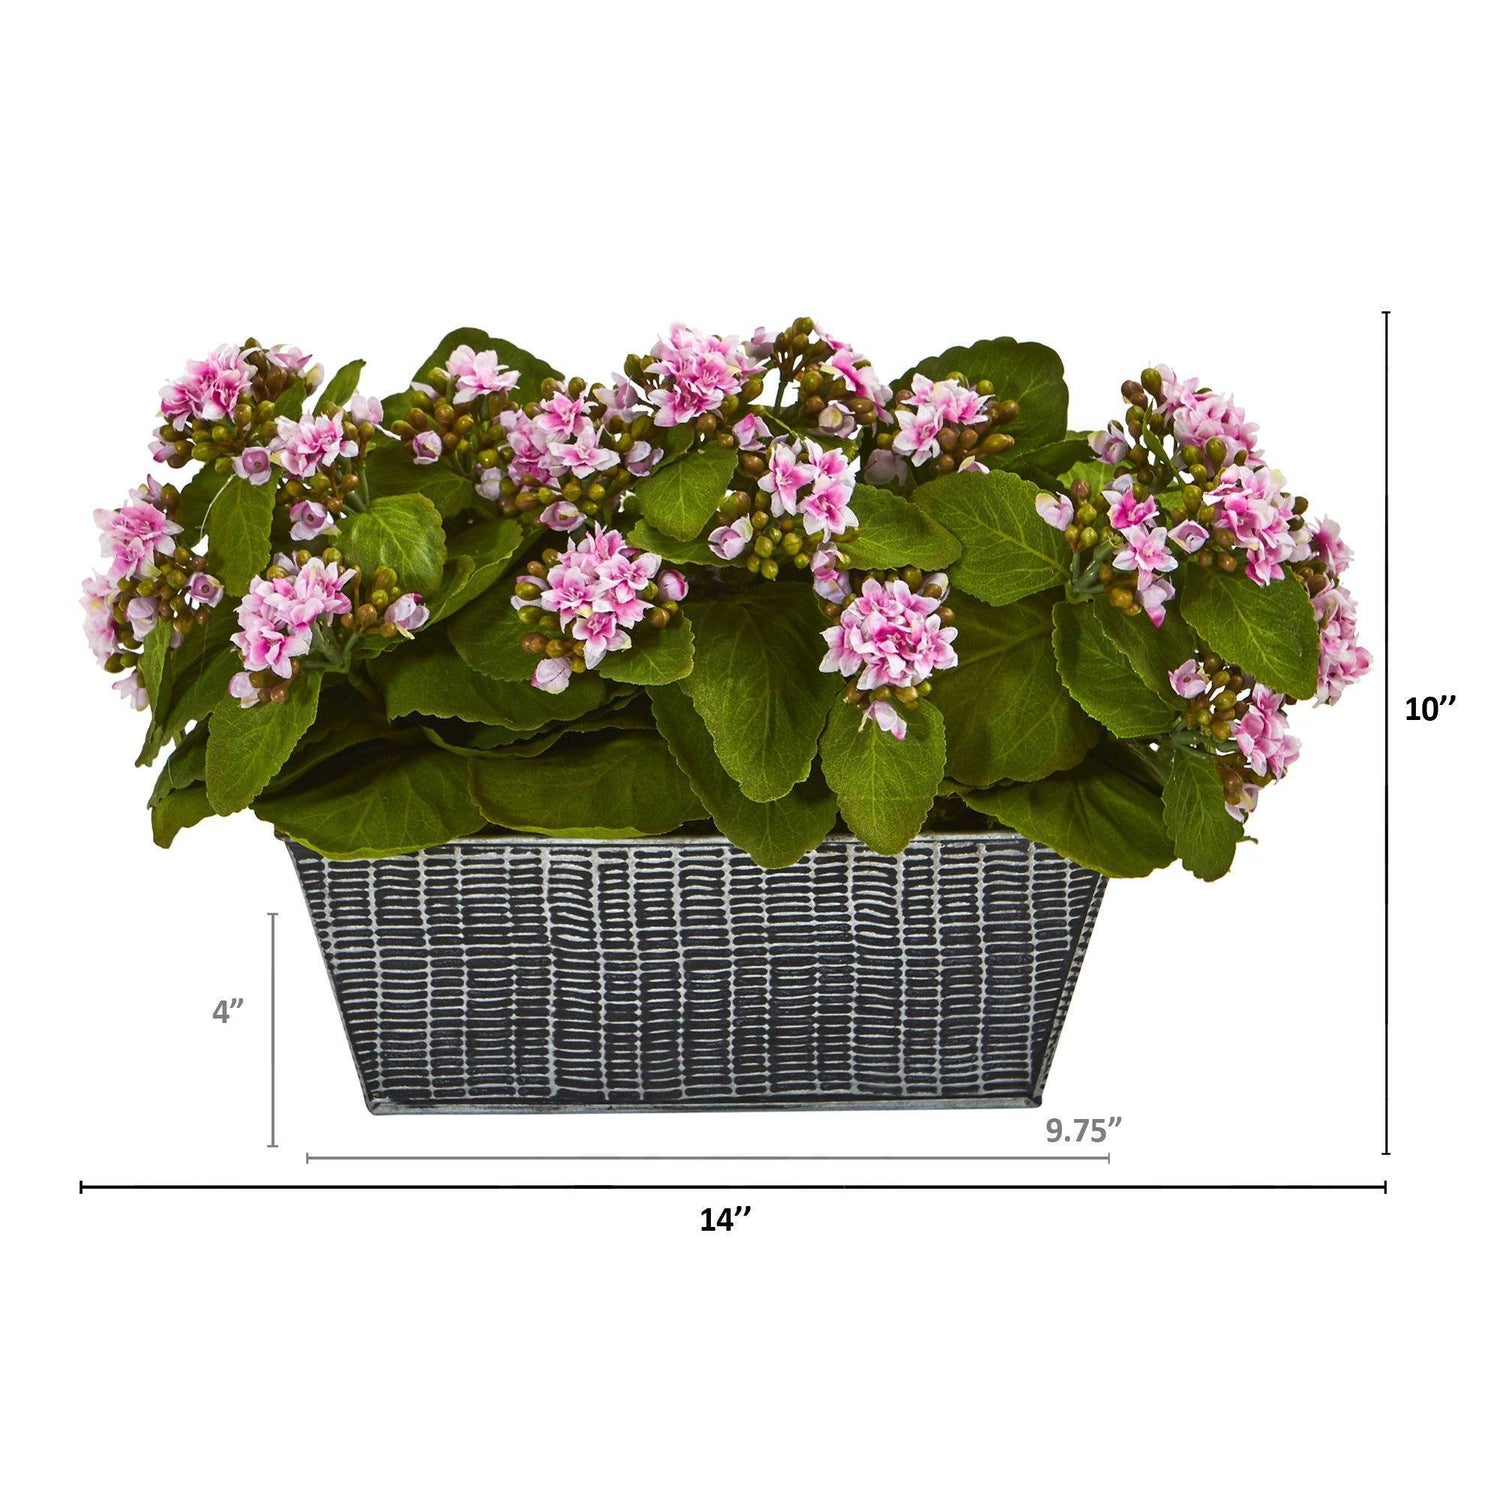 14” Kalanchoe Artificial Plant in Black Embossed Planter